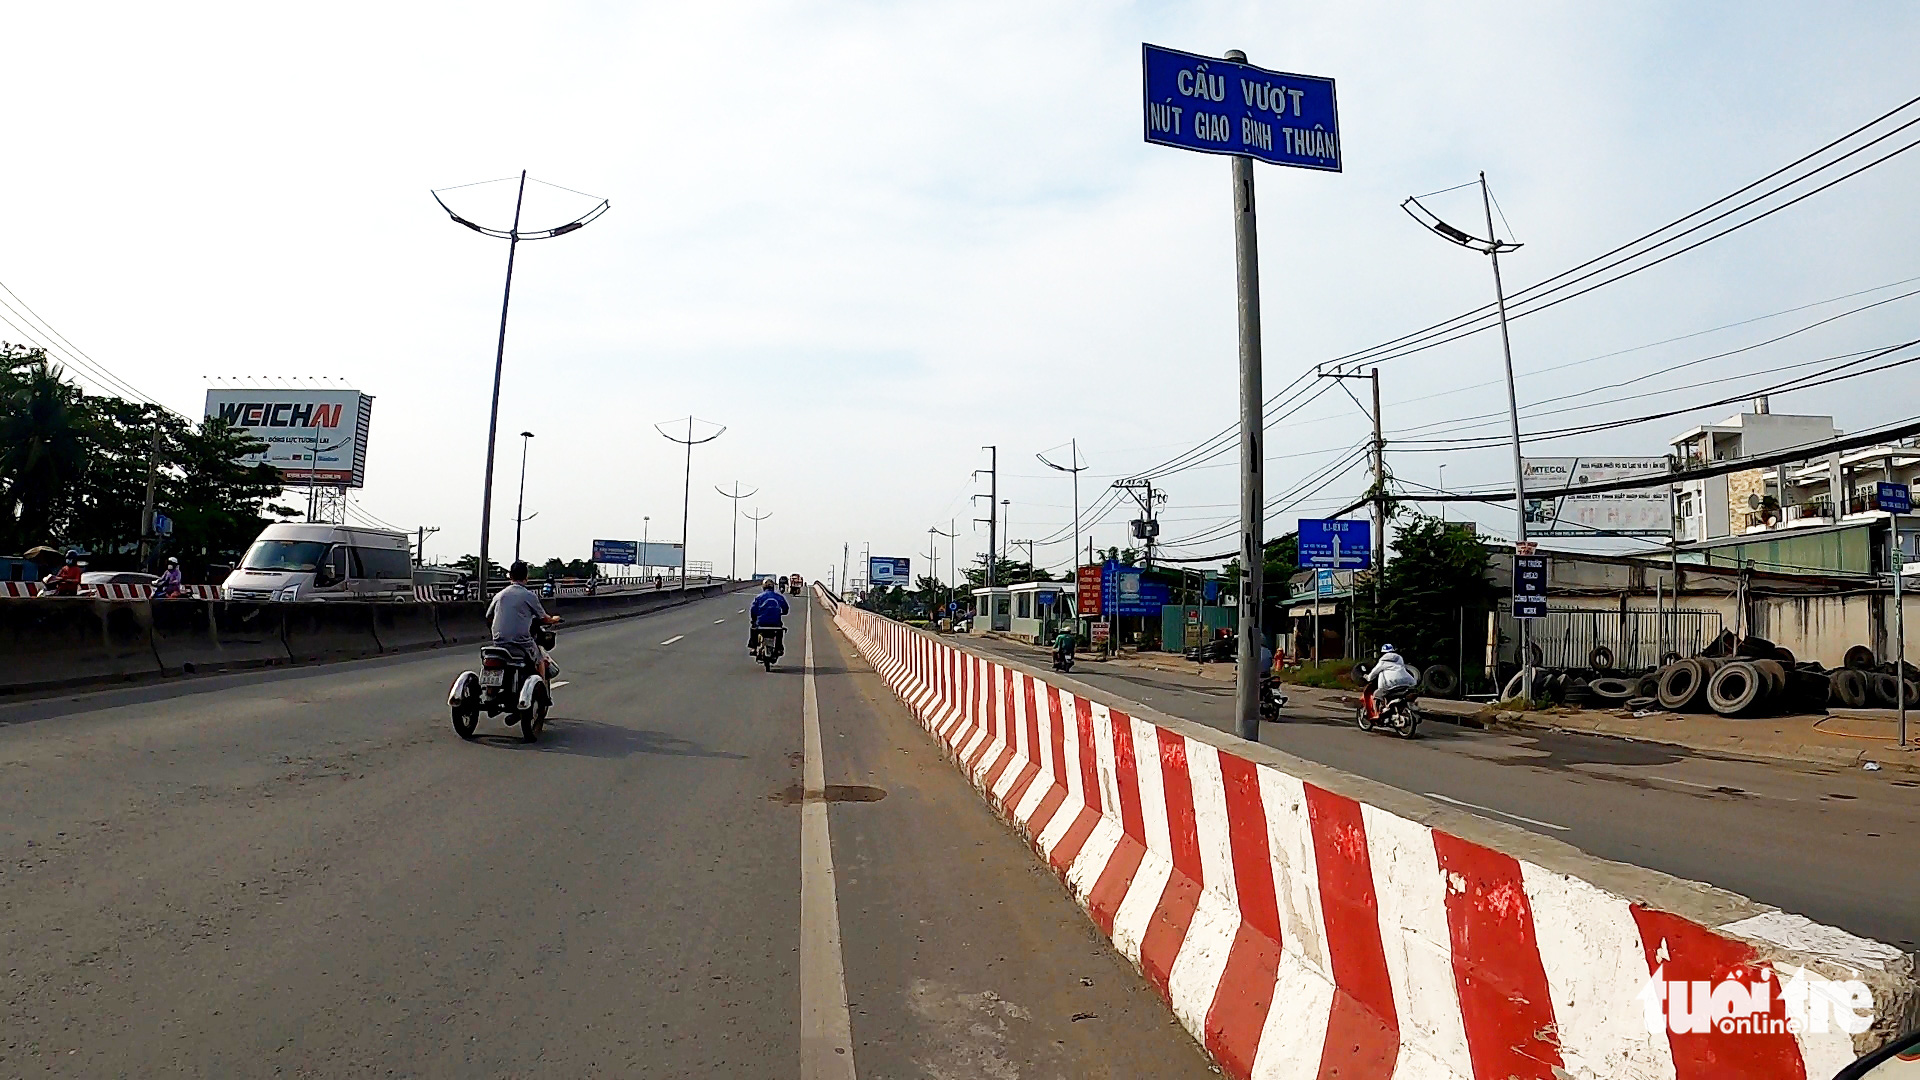 A section of National Highway No.1 in Binh Chanh District, Ho Chi Minh City that is prone to tire-puncturing nails. Photo: Ngoc Khai / Tuoi Tre